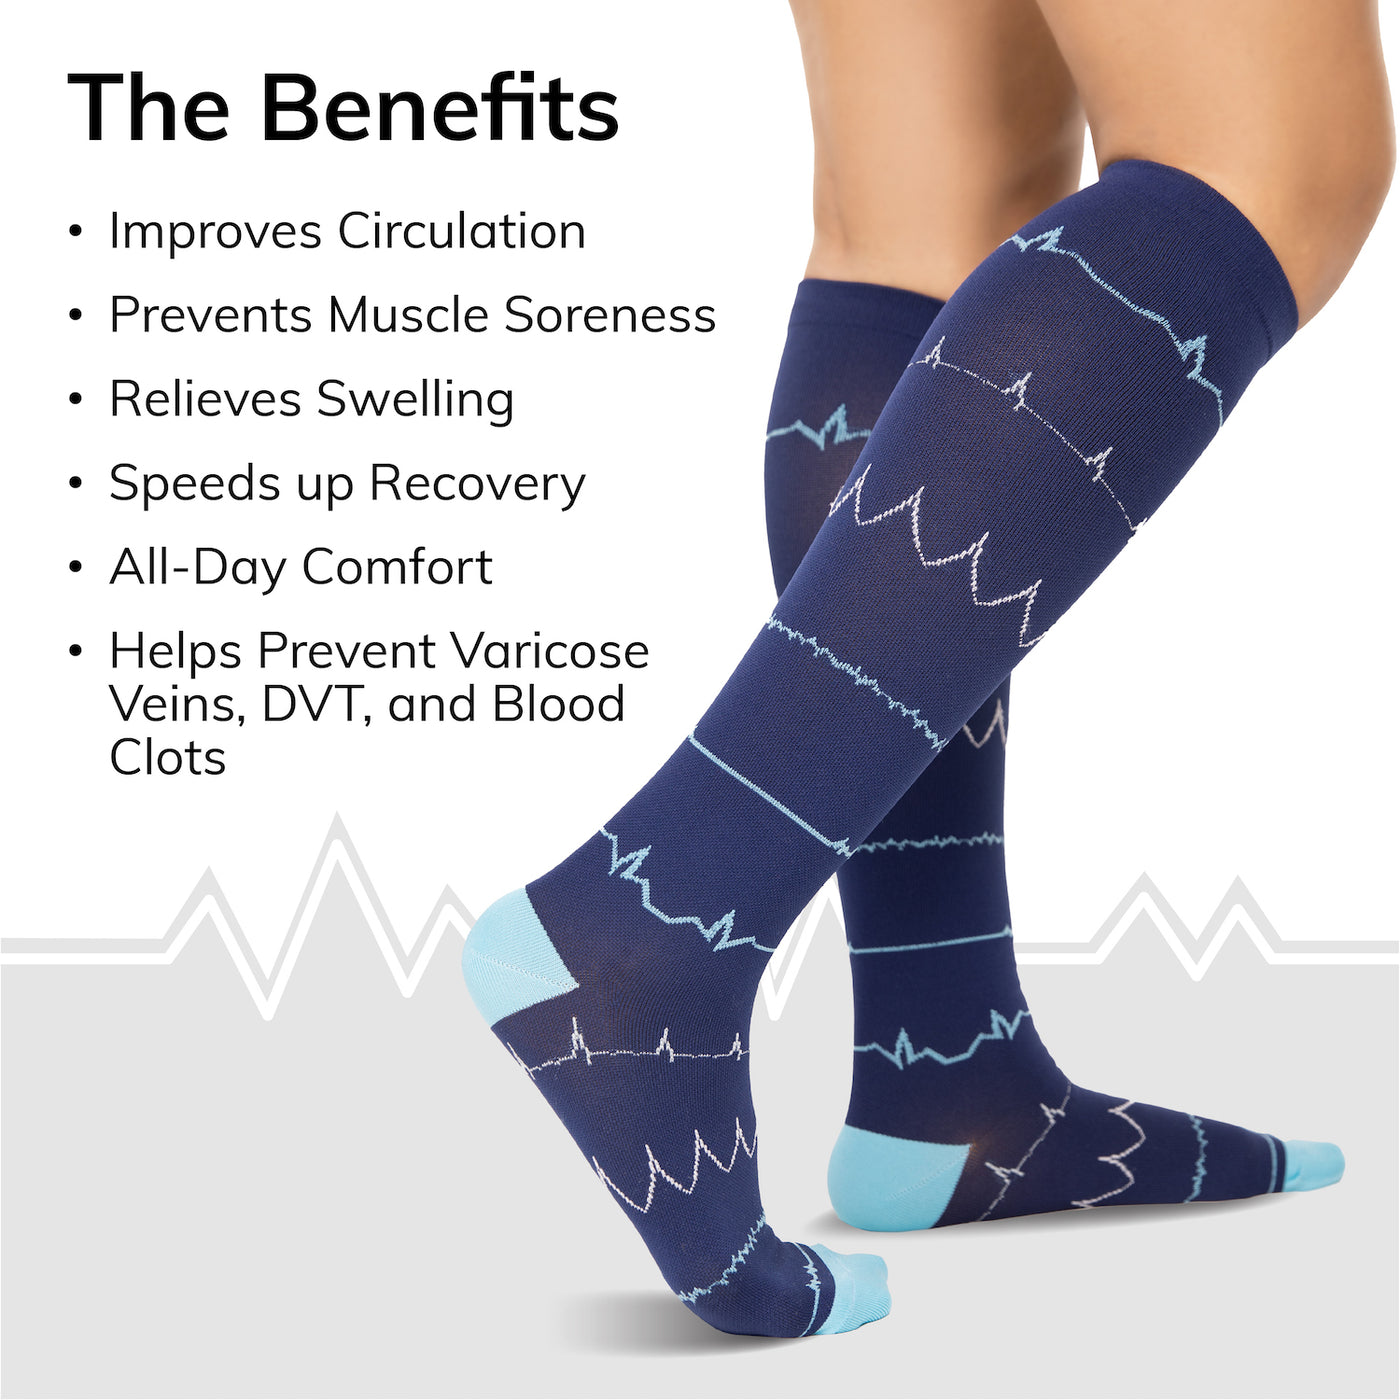 Our cute nursing socks improve circulation, prevent muscle soreness and prevent varicose veins